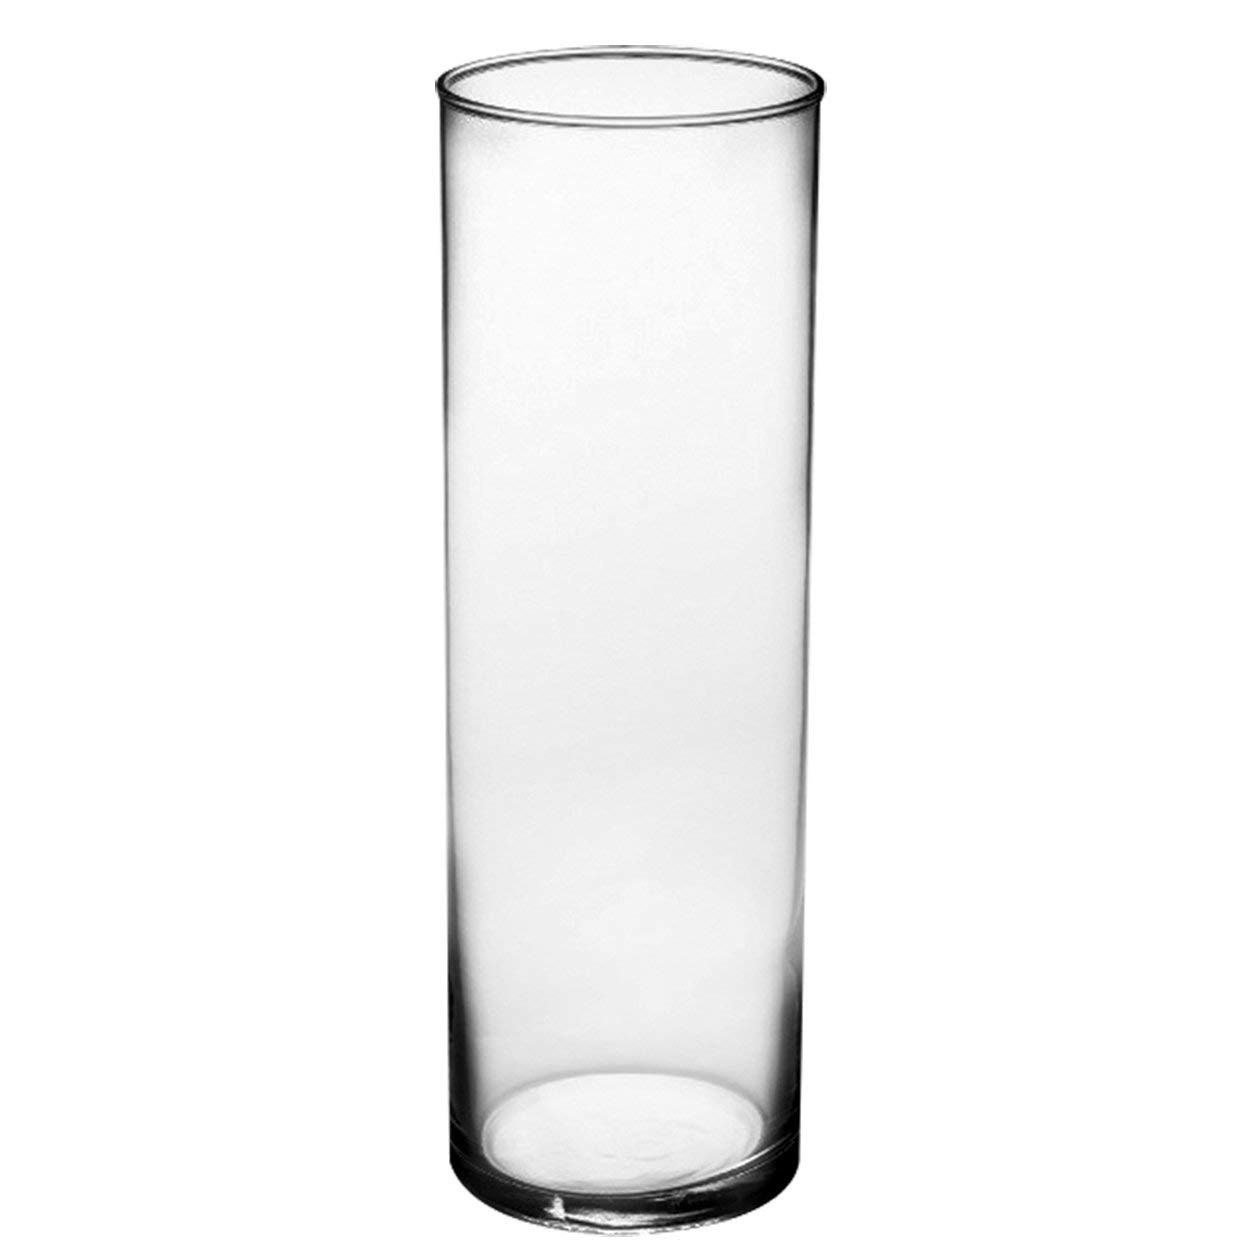 30 Awesome Libbey 6 Inch Cylinder Vase 2024 free download libbey 6 inch cylinder vase of amazon com syndicate sales 3 1 2 x 10 1 2 cylinder vase clear pertaining to amazon com syndicate sales 3 1 2 x 10 1 2 cylinder vase clear planters garden outdo